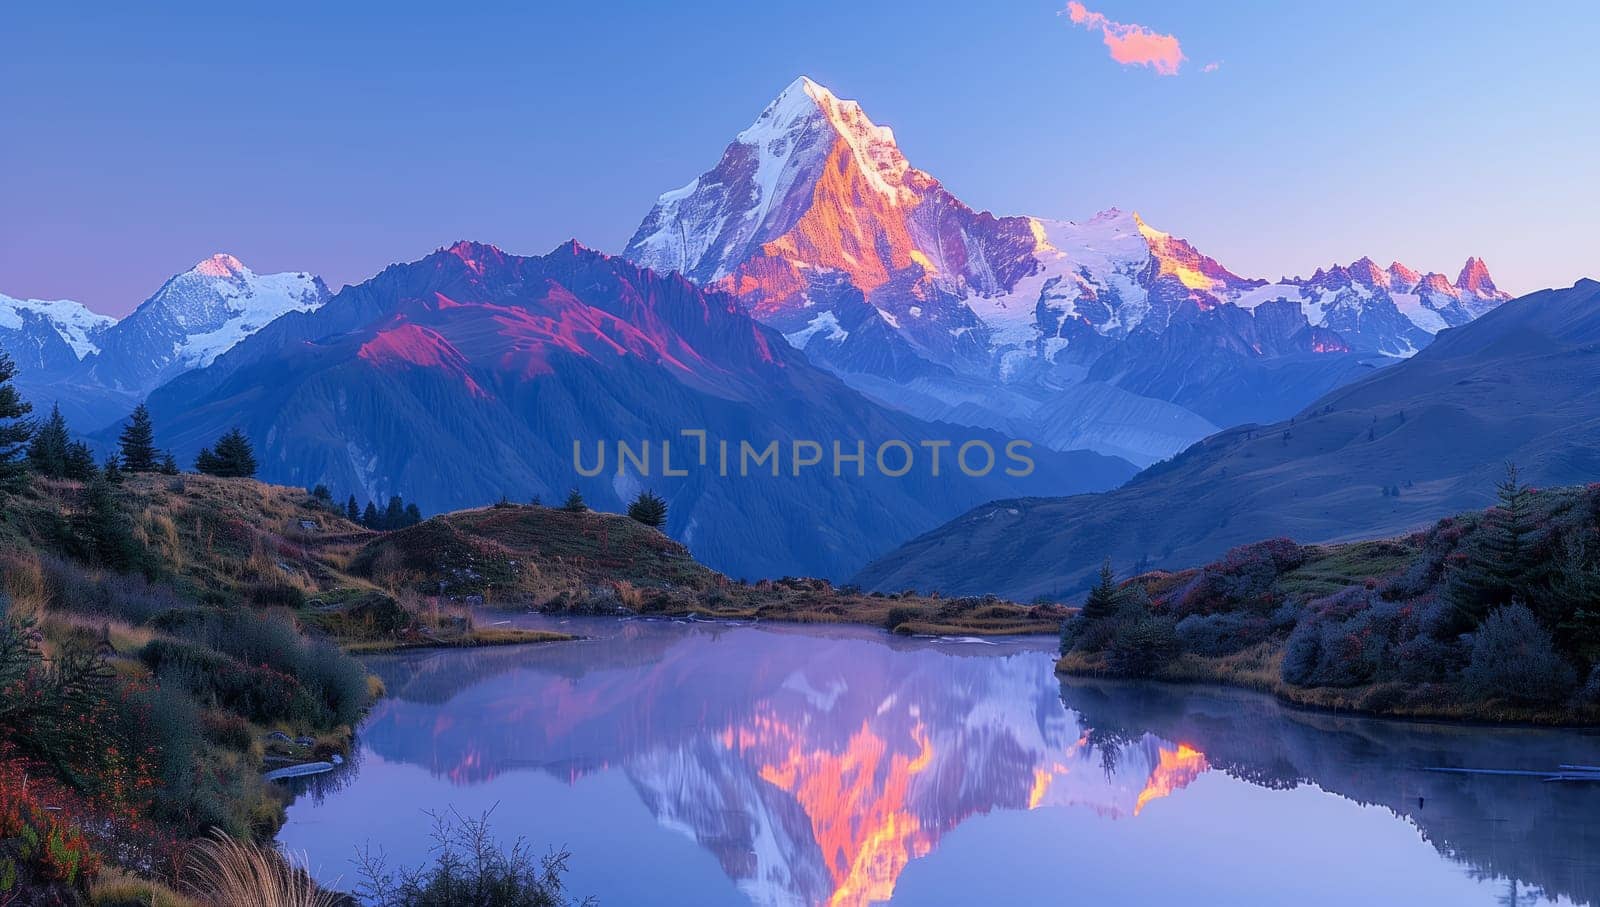 Mountain reflected in lake at sunset, creating stunning natural landscape by richwolf